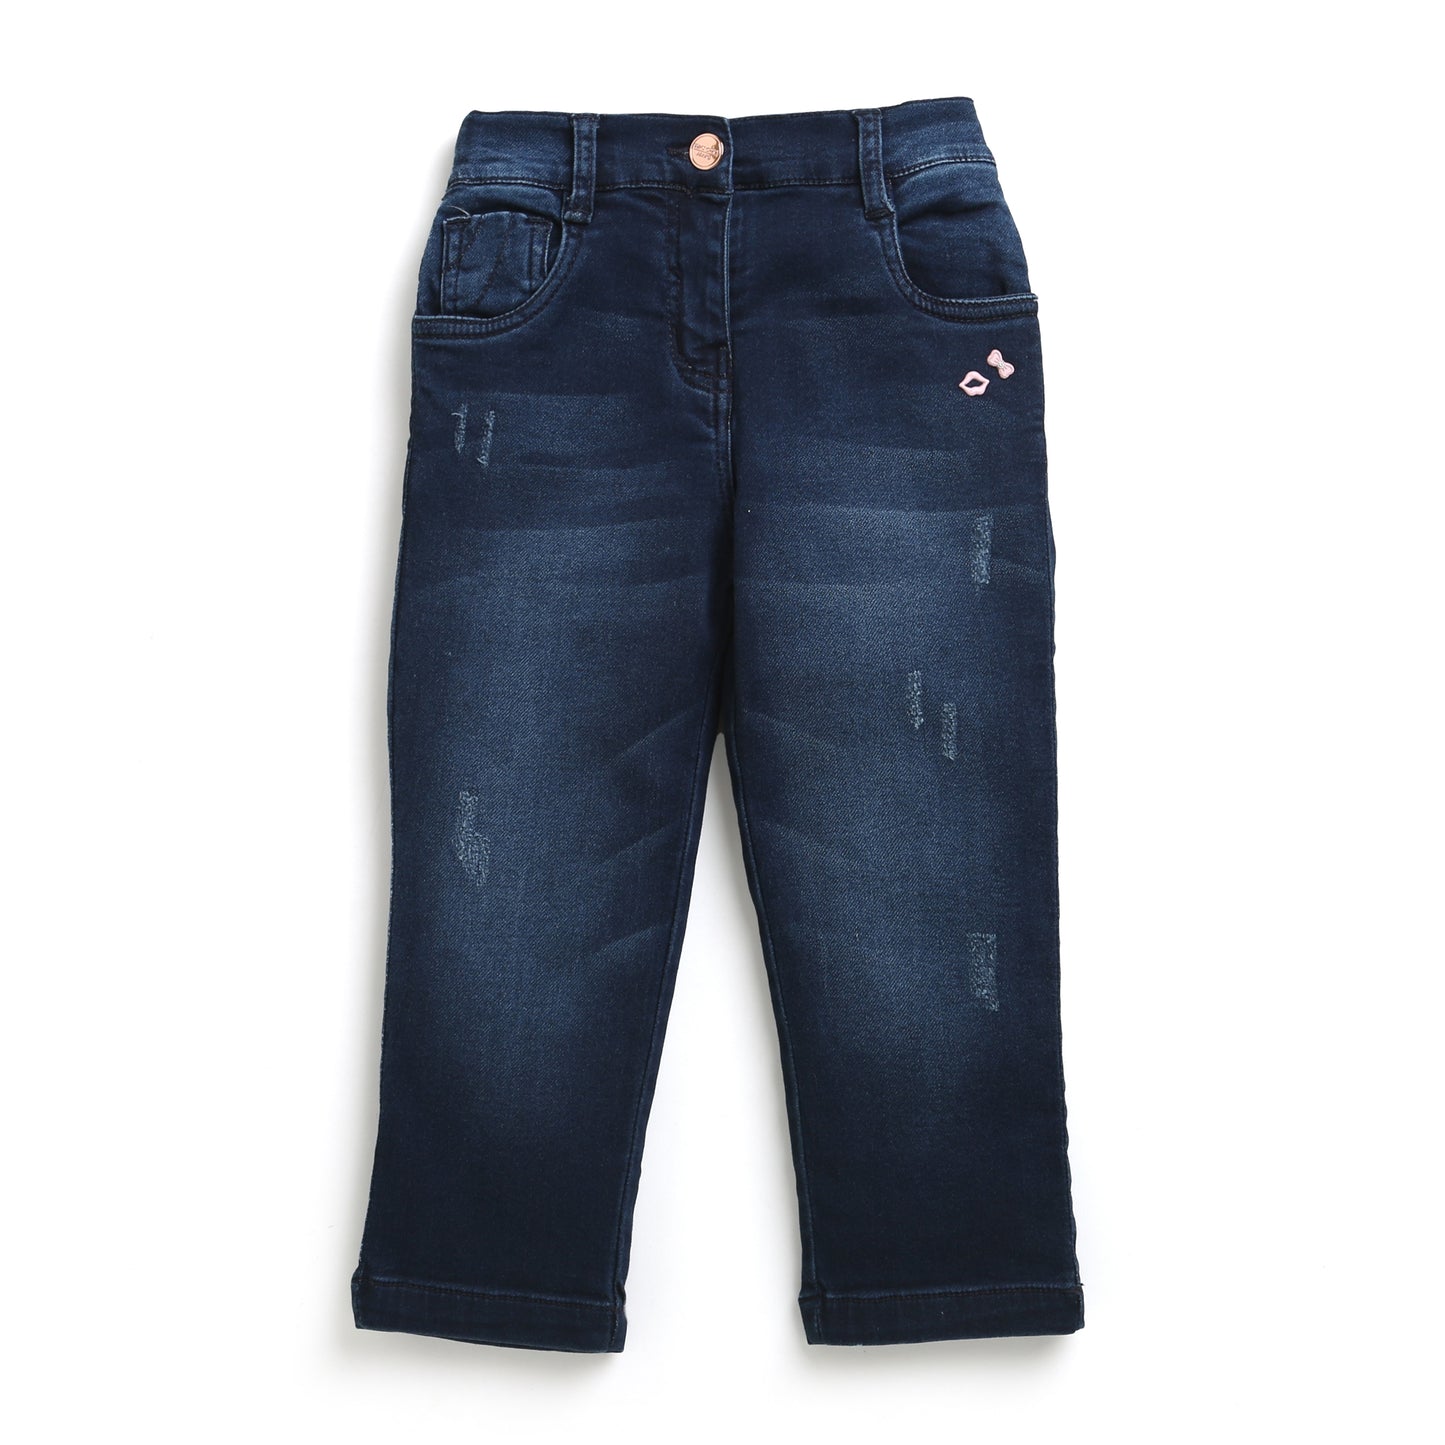 Blue Washed Mid Raise Distressed Denims